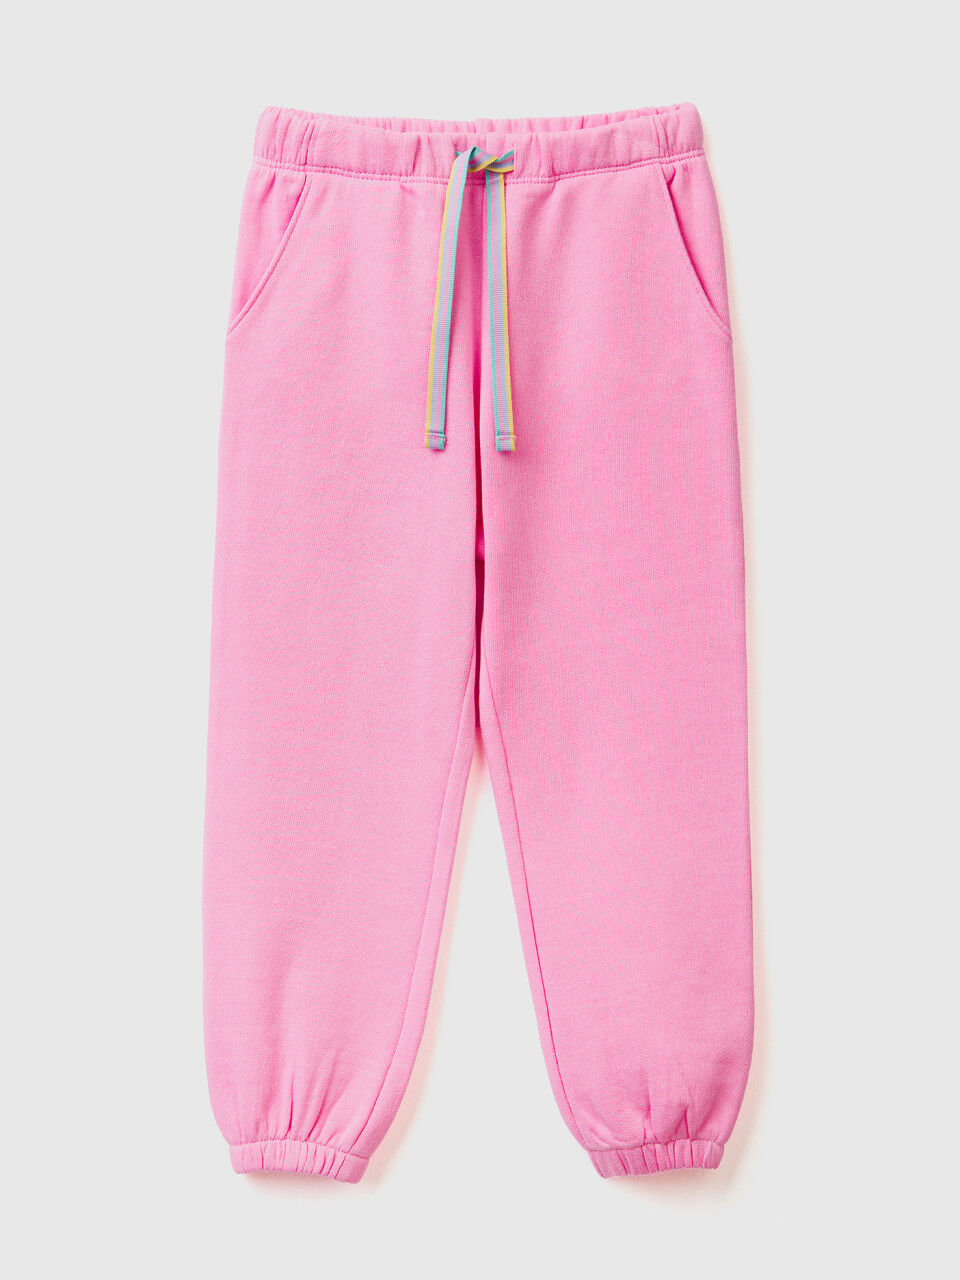 Sweatpants with heart pocket